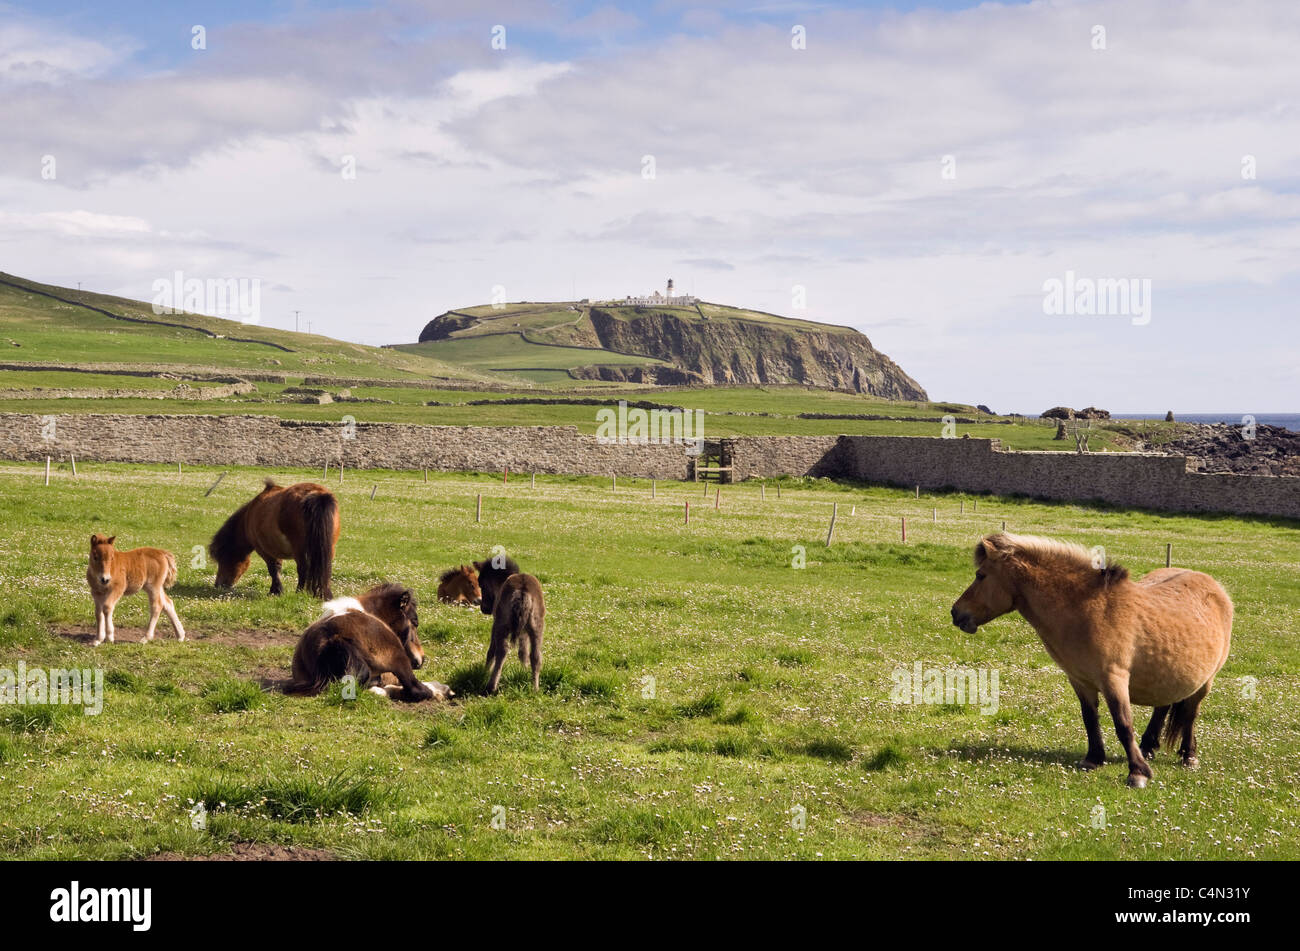 Shetland ponies mares with young foals in a field in summer. Sumburgh, Shetland Islands, Scotland, UK Stock Photo